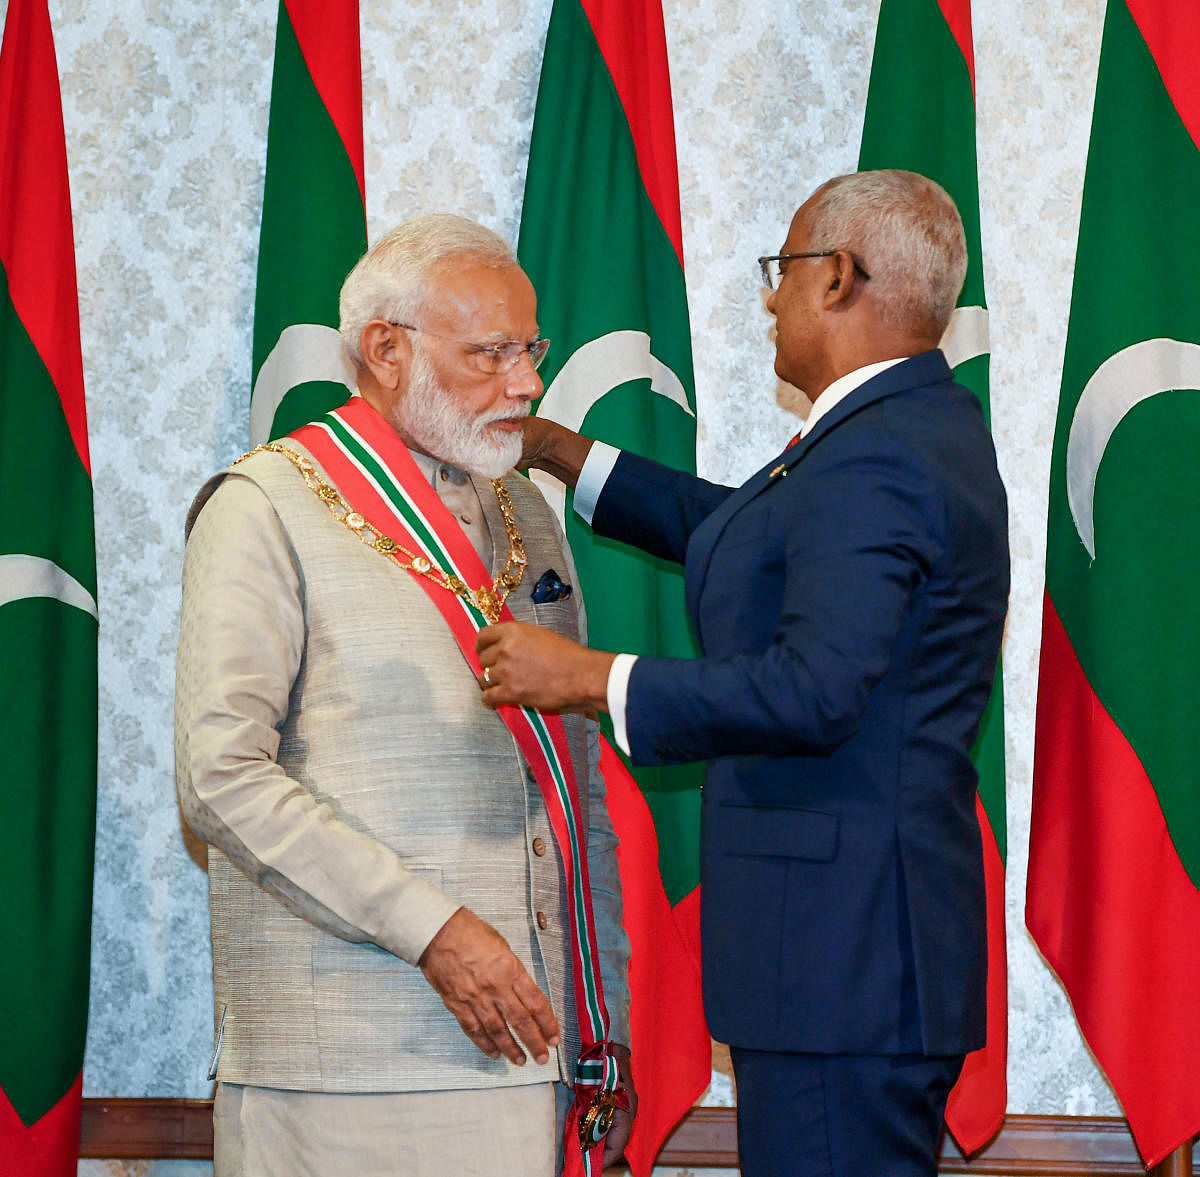 Prime Minister Narendra Modi receives the Maldives Highest Honour Order of the Distinguished Rule of Nishan Izzuddeen from President of Maldives Ibrahim Mohamed Solih at Male, in Maldives. PTI